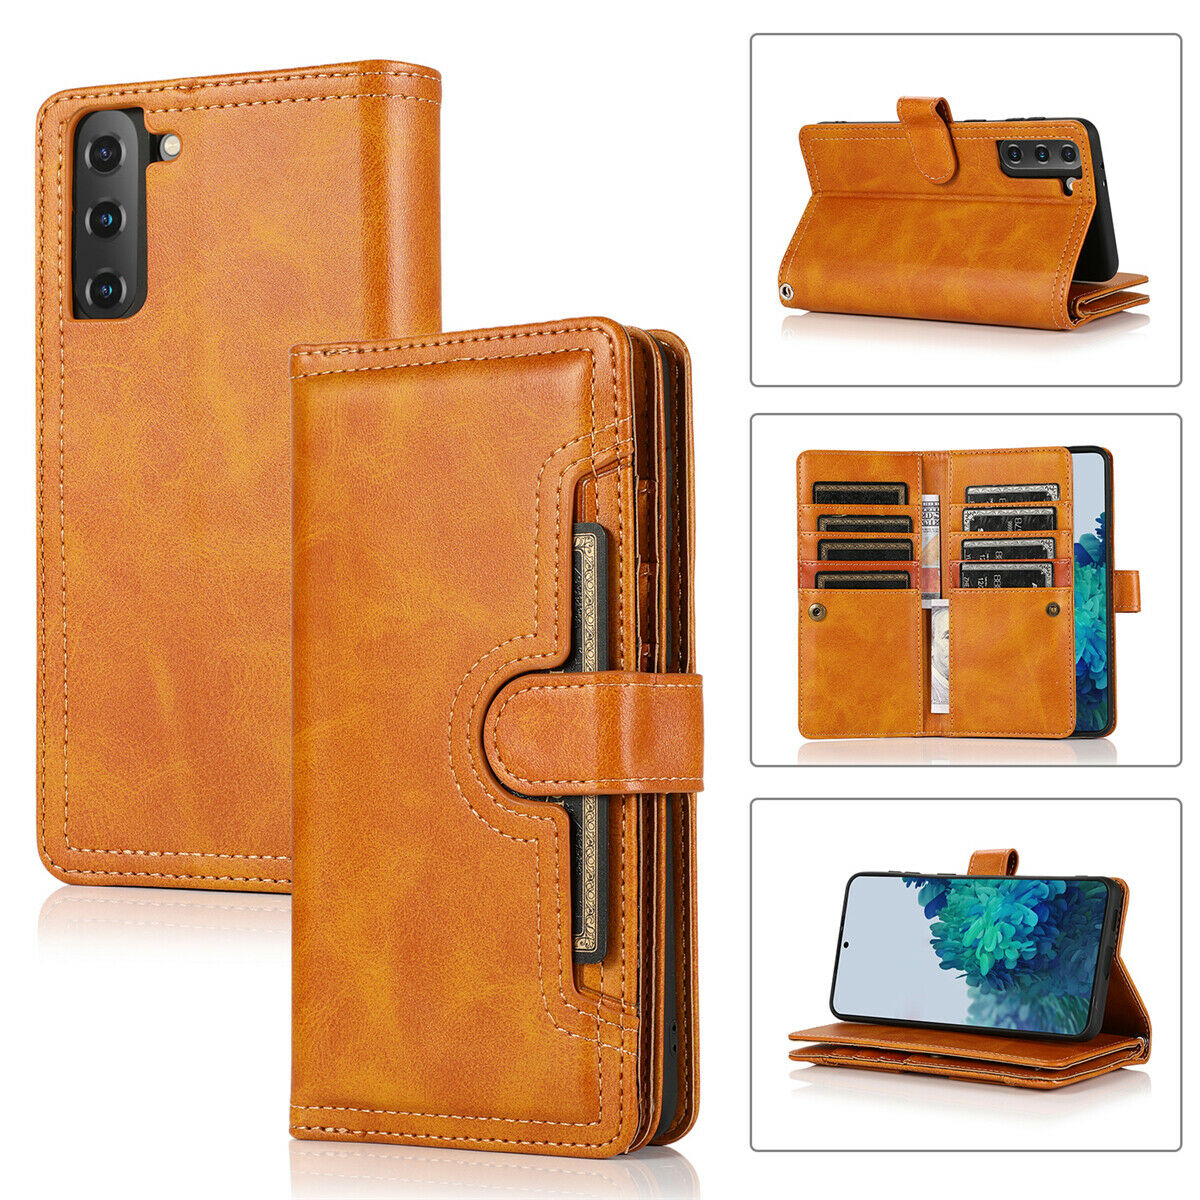 Flip Magnetic Leather Strap Card Case for Samsung Galaxy S21/Ultra/Plus - carolay.co